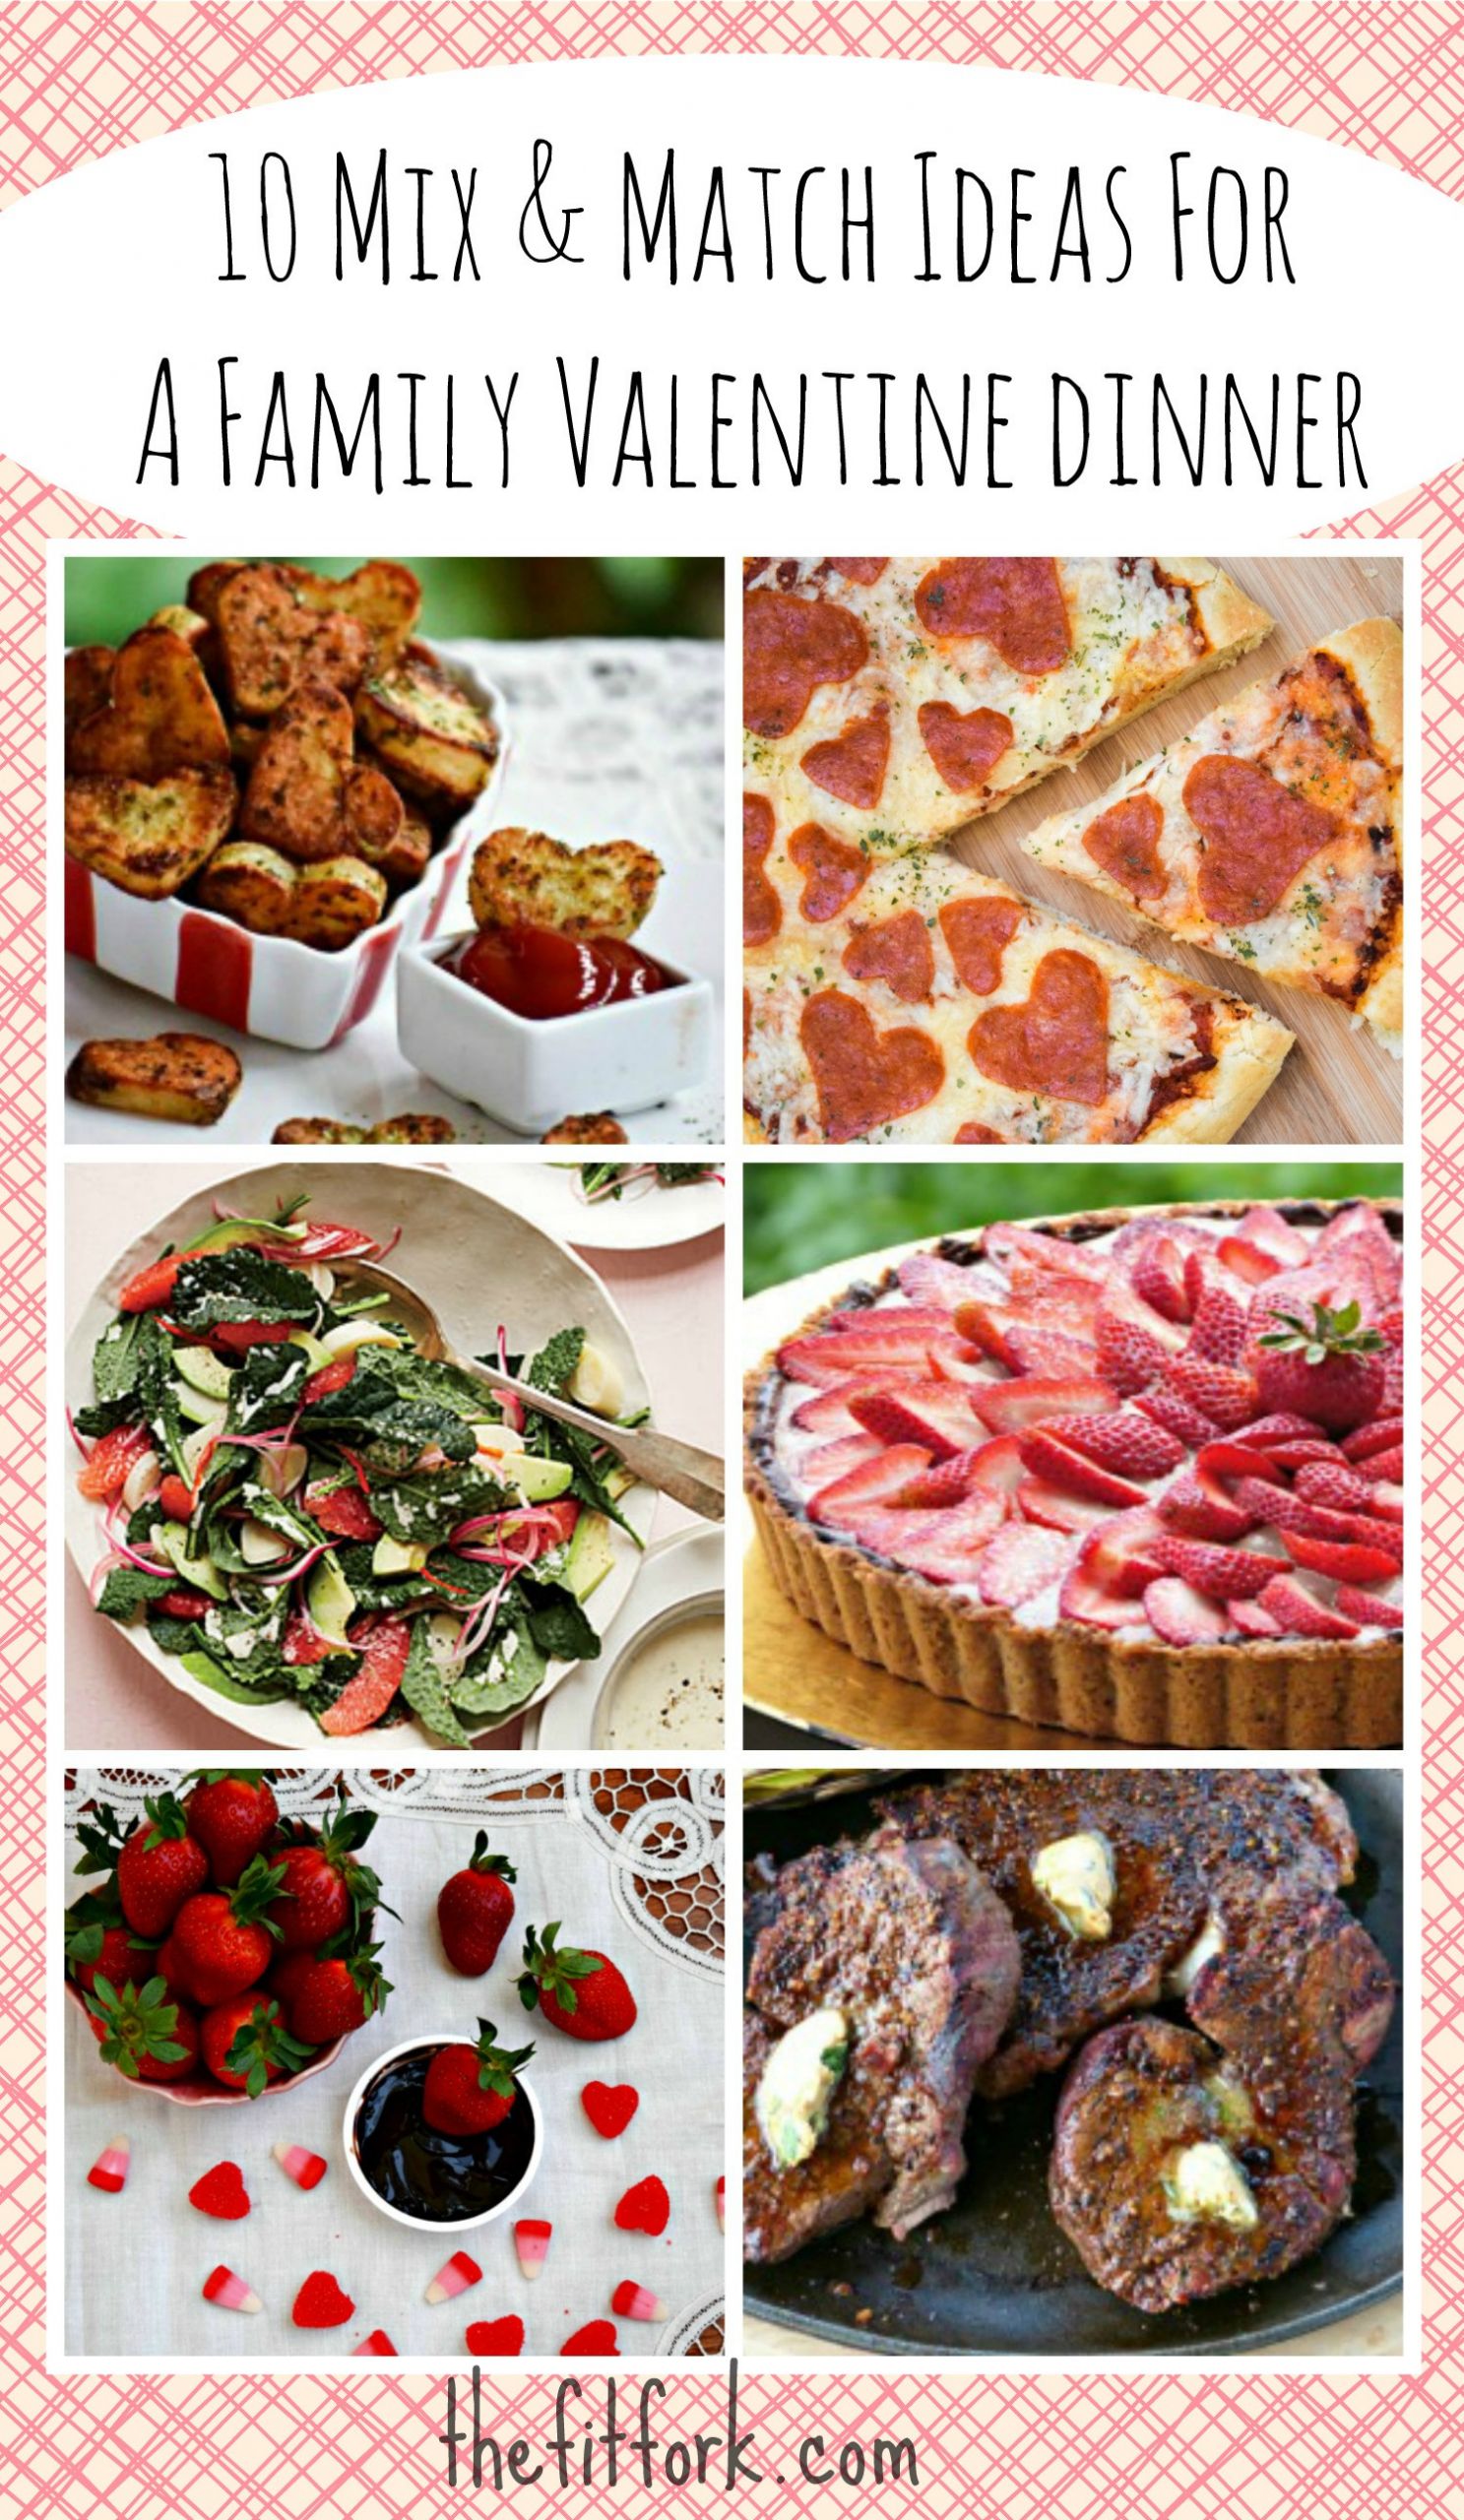 Valentine'S Dinner Ideas For Family
 Fast Fit Family Valentine Dinners – Mix and Match Menu